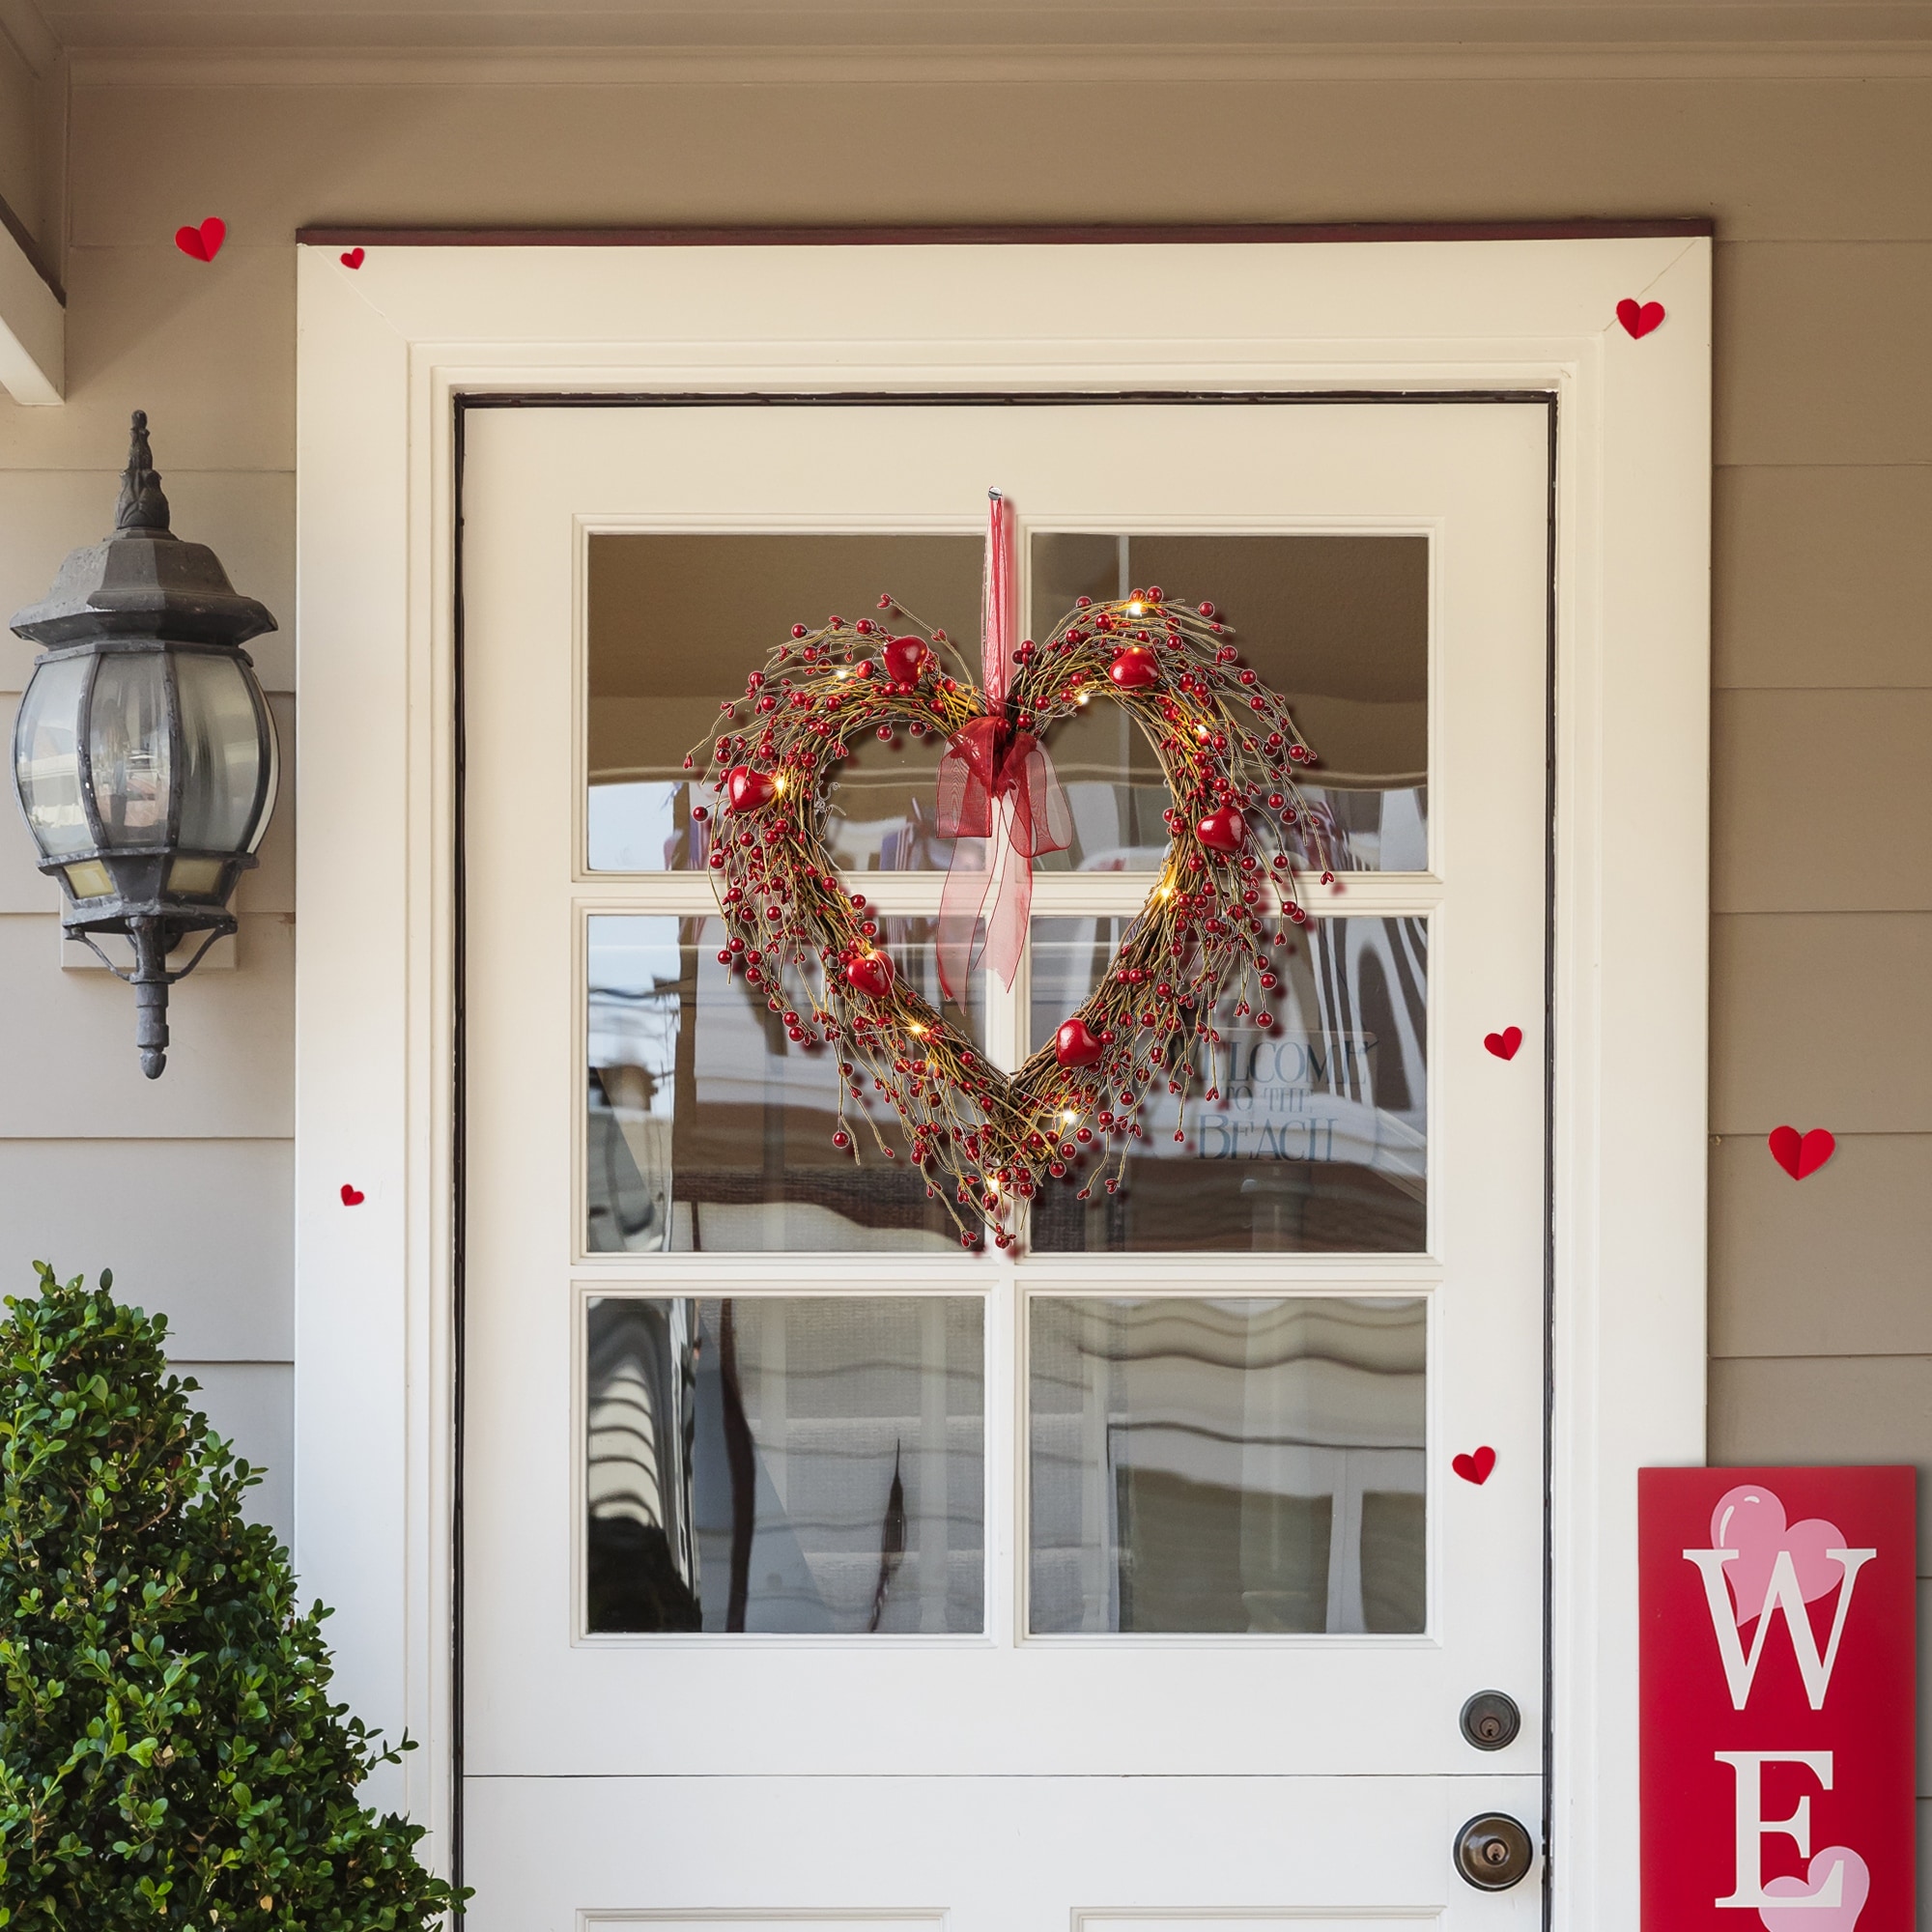 Glitzhome Heart Shaped Hearts & Berry Wreath, Color: Red - JCPenney